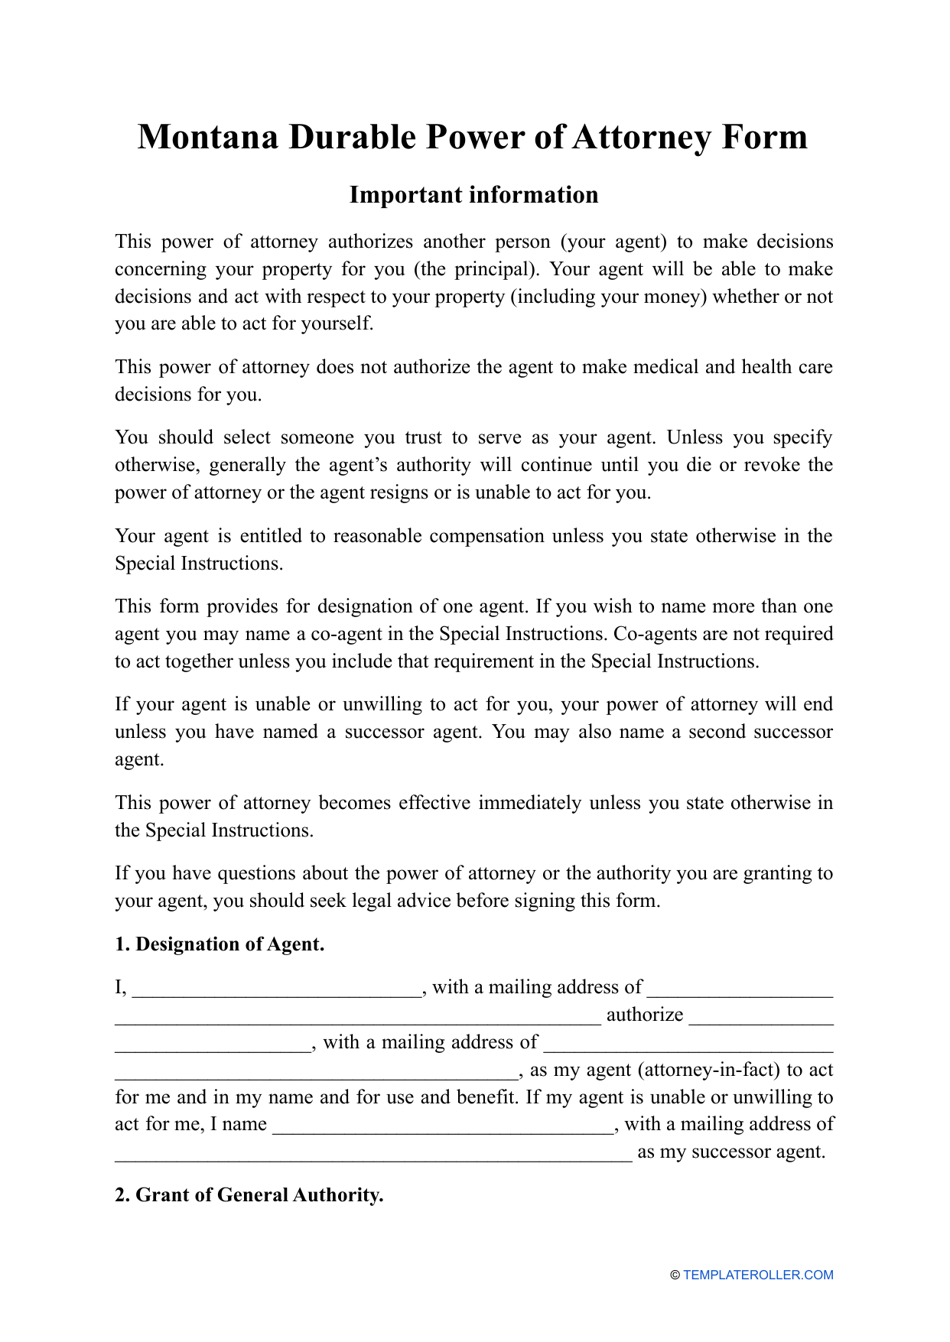 Durable Power of Attorney Form - Montana, Page 1